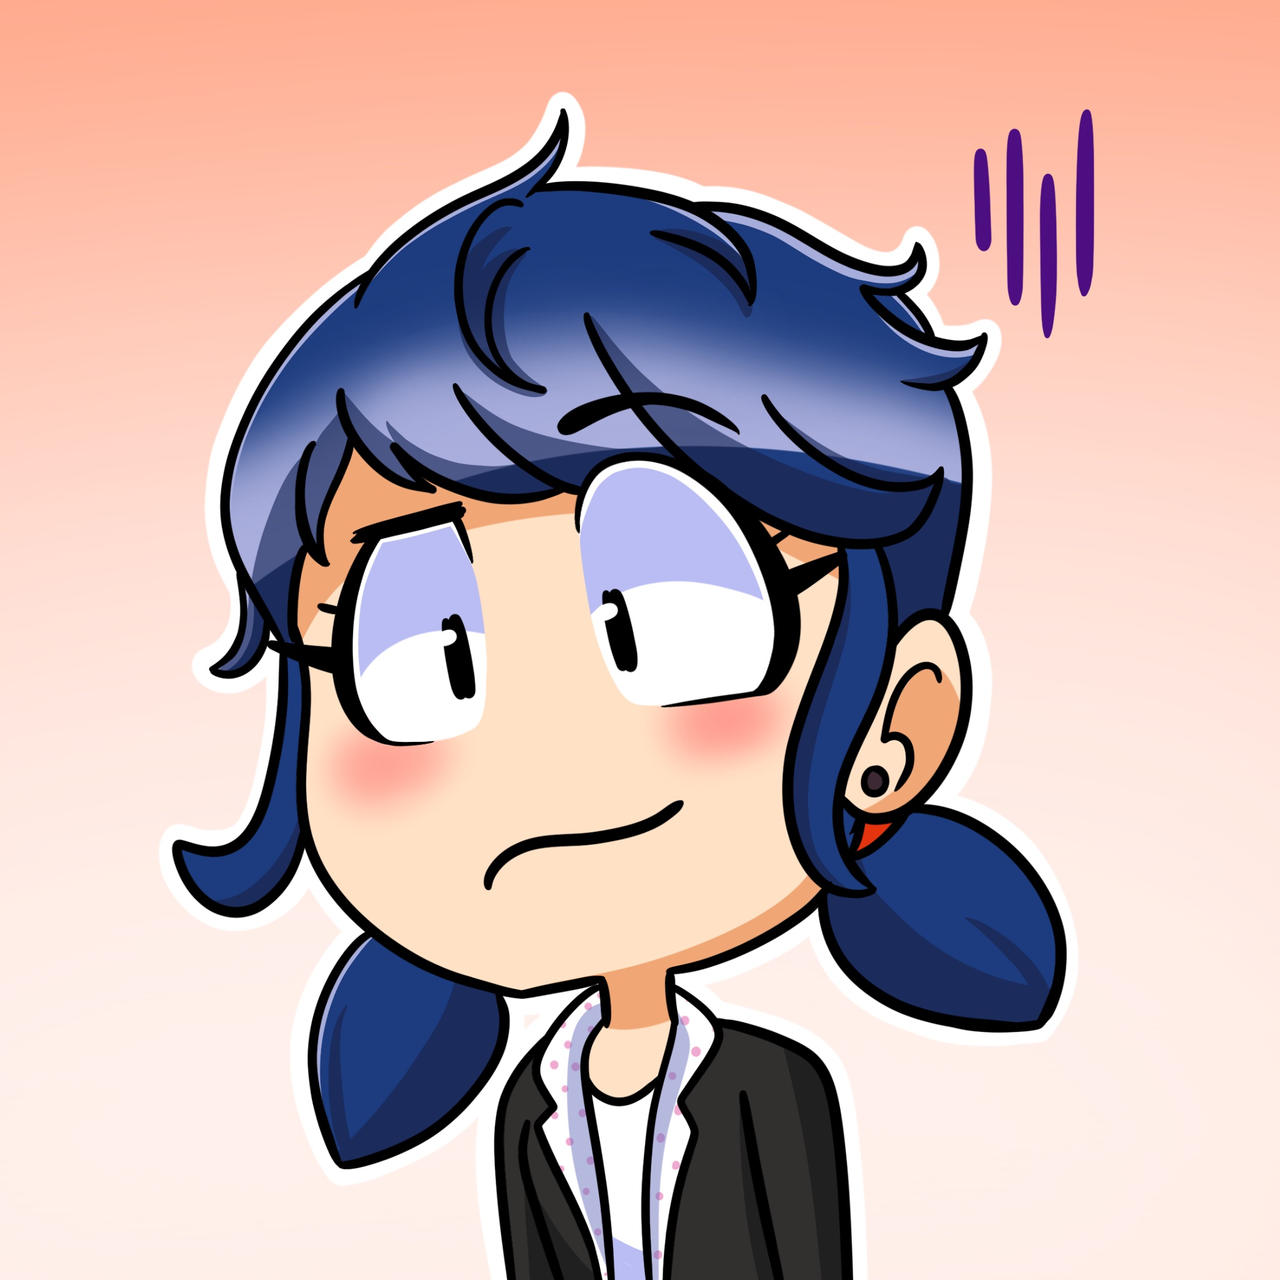 marinette w/ messy hair situations by douxificarted on DeviantArt